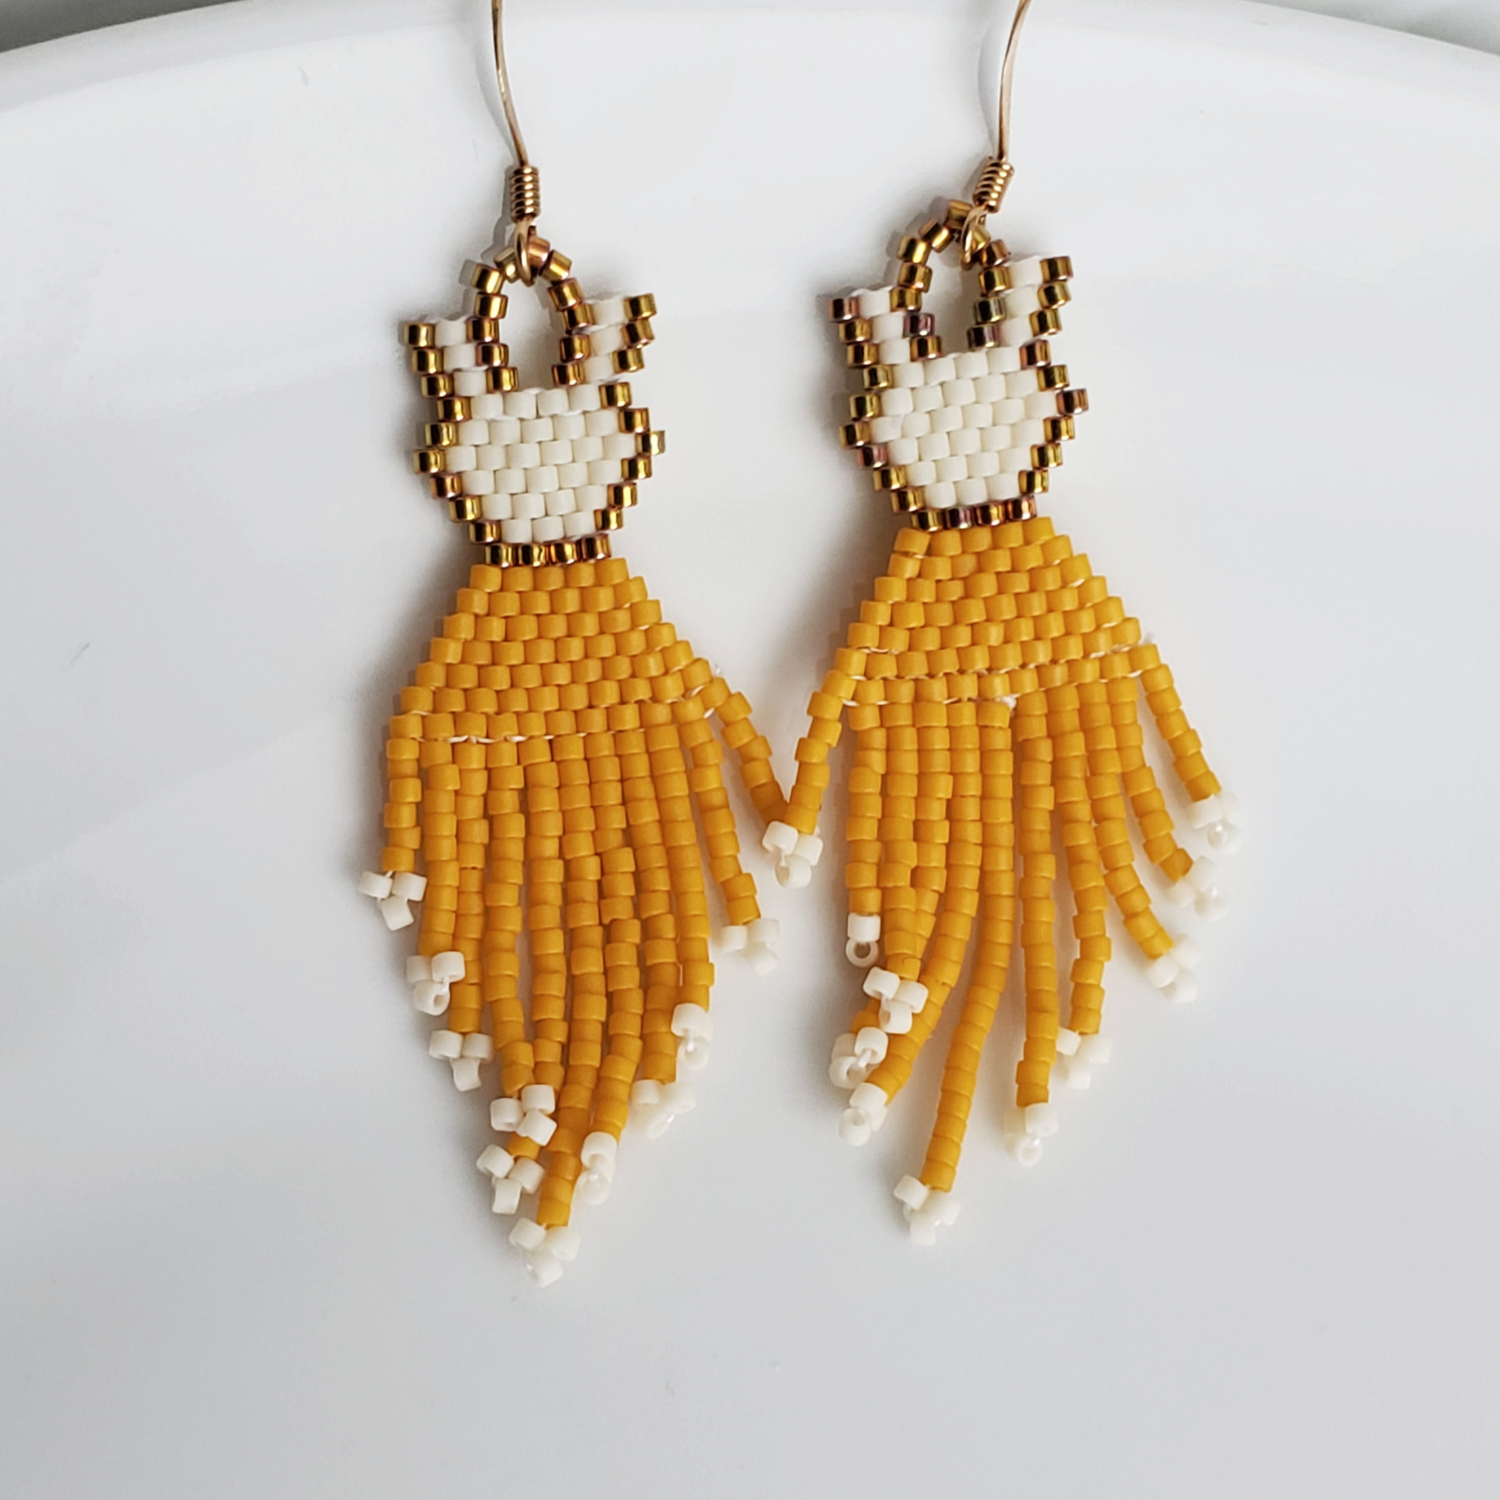 Beige, Gold and White Earrings